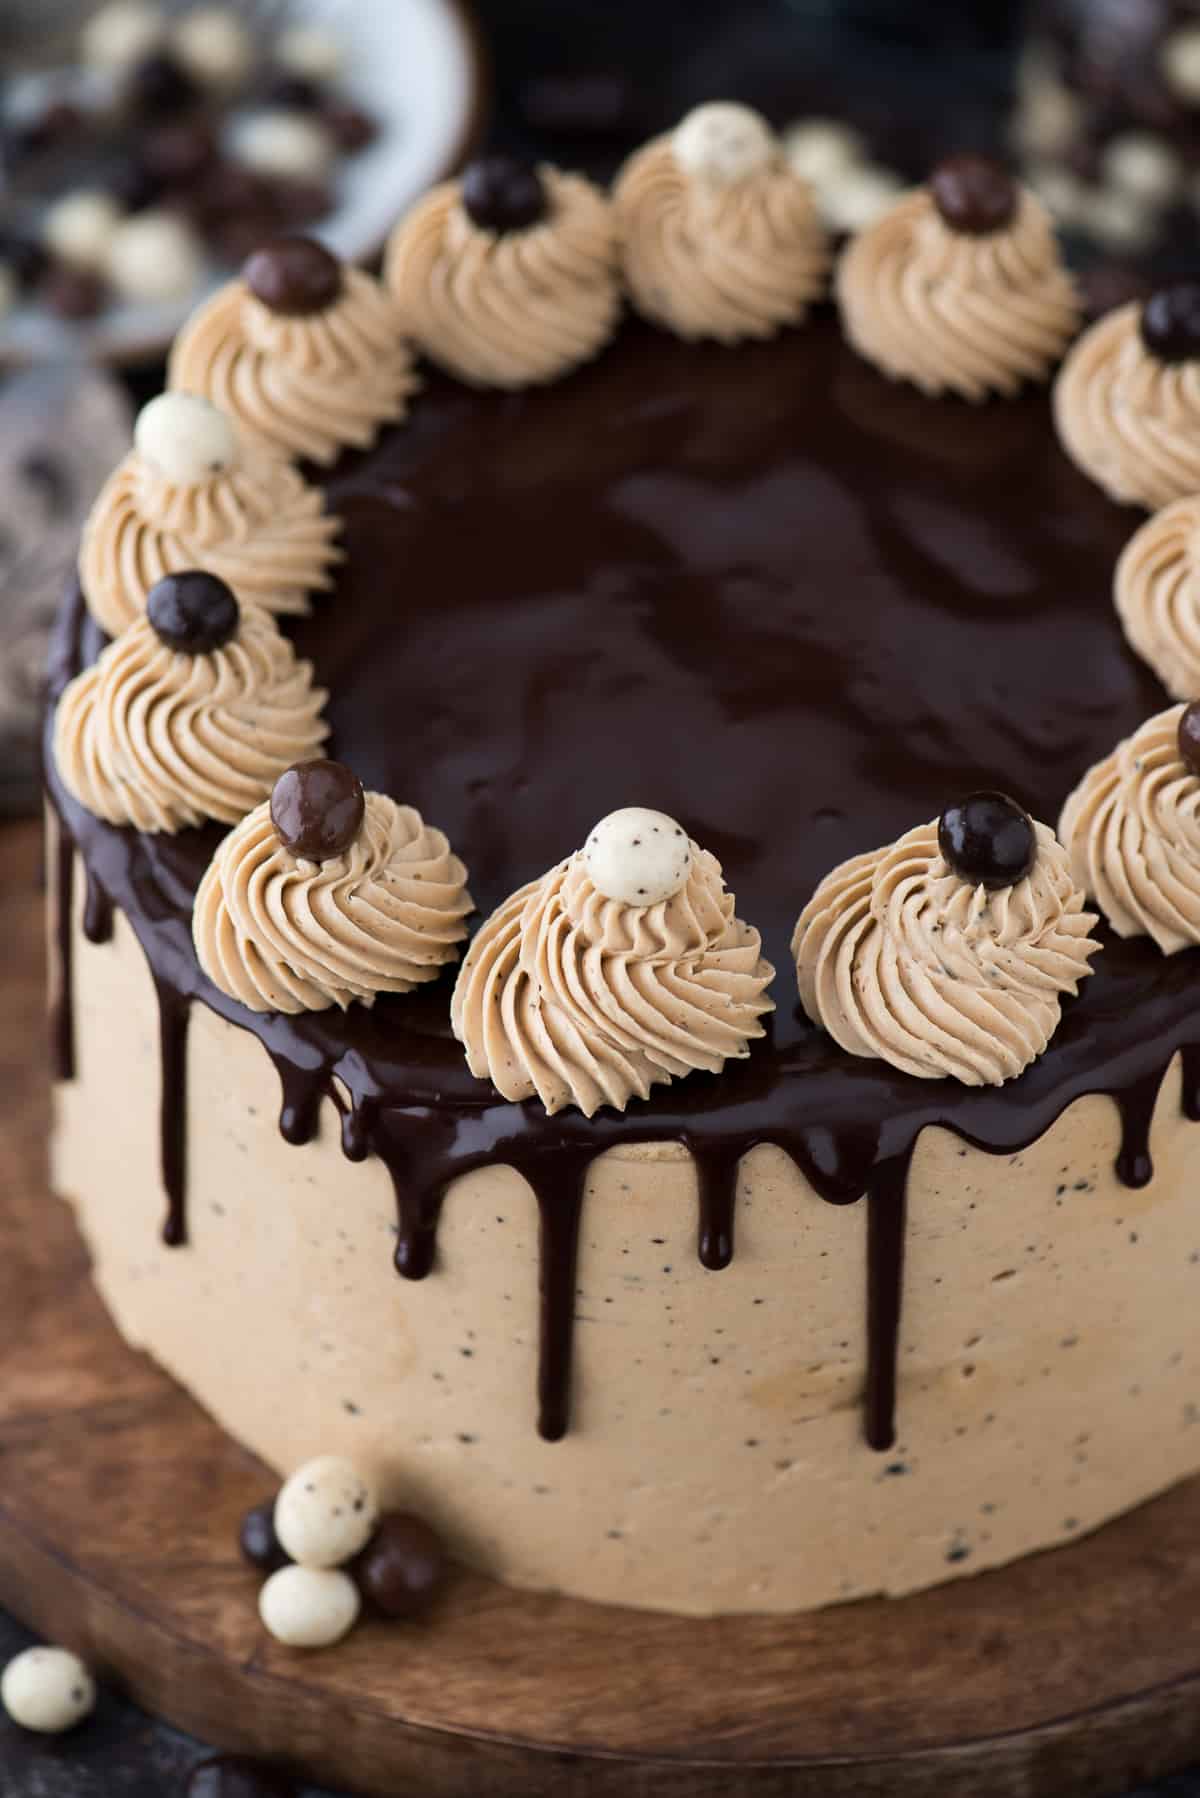 2 layer chocolate espresso cake - this cake got rave reviews! Everyone loves the pairing of chocolate & coffee!